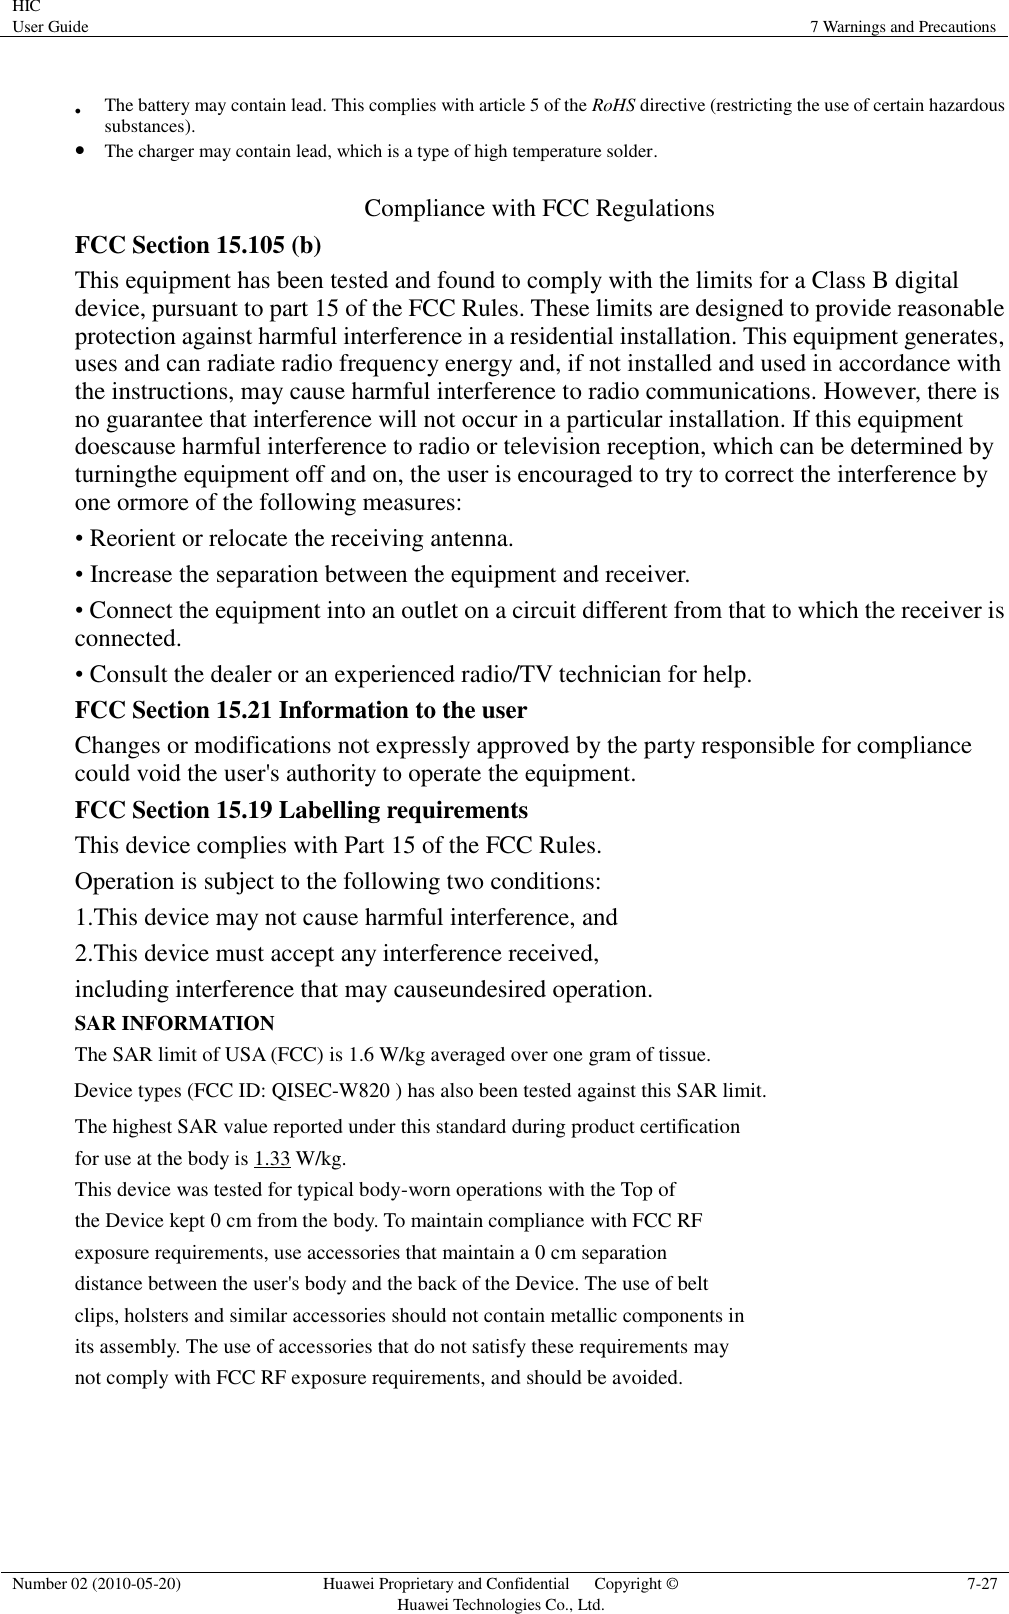 HIC User Guide 7 Warnings and Precautions  Number 02 (2010-05-20) Huawei Proprietary and Confidential      Copyright © Huawei Technologies Co., Ltd. 7-27   The battery may contain lead. This complies with article 5 of the RoHS directive (restricting the use of certain hazardous substances).  The charger may contain lead, which is a type of high temperature solder.  Compliance with FCC Regulations FCC Section 15.105 (b) This equipment has been tested and found to comply with the limits for a Class B digital device, pursuant to part 15 of the FCC Rules. These limits are designed to provide reasonable protection against harmful interference in a residential installation. This equipment generates, uses and can radiate radio frequency energy and, if not installed and used in accordance with the instructions, may cause harmful interference to radio communications. However, there is no guarantee that interference will not occur in a particular installation. If this equipment doescause harmful interference to radio or television reception, which can be determined by turningthe equipment off and on, the user is encouraged to try to correct the interference by one ormore of the following measures:  • Reorient or relocate the receiving antenna.  • Increase the separation between the equipment and receiver.  • Connect the equipment into an outlet on a circuit different from that to which the receiver is connected.  • Consult the dealer or an experienced radio/TV technician for help. FCC Section 15.21 Information to the user Changes or modifications not expressly approved by the party responsible for compliance could void the user&apos;s authority to operate the equipment. FCC Section 15.19 Labelling requirements This device complies with Part 15 of the FCC Rules.  Operation is subject to the following two conditions: 1.This device may not cause harmful interference, and 2.This device must accept any interference received,  including interference that may causeundesired operation. SAR INFORMATION The SAR limit of USA (FCC) is 1.6 W/kg averaged over one gram of tissue. Device types (FCC ID: QISEC-W820 ) has also been tested against this SAR limit. The highest SAR value reported under this standard during product certification for use at the body is 1.33 W/kg.  This device was tested for typical body-worn operations with the Top of the Device kept 0 cm from the body. To maintain compliance with FCC RF exposure requirements, use accessories that maintain a 0 cm separation distance between the user&apos;s body and the back of the Device. The use of belt clips, holsters and similar accessories should not contain metallic components in its assembly. The use of accessories that do not satisfy these requirements may not comply with FCC RF exposure requirements, and should be avoided.   